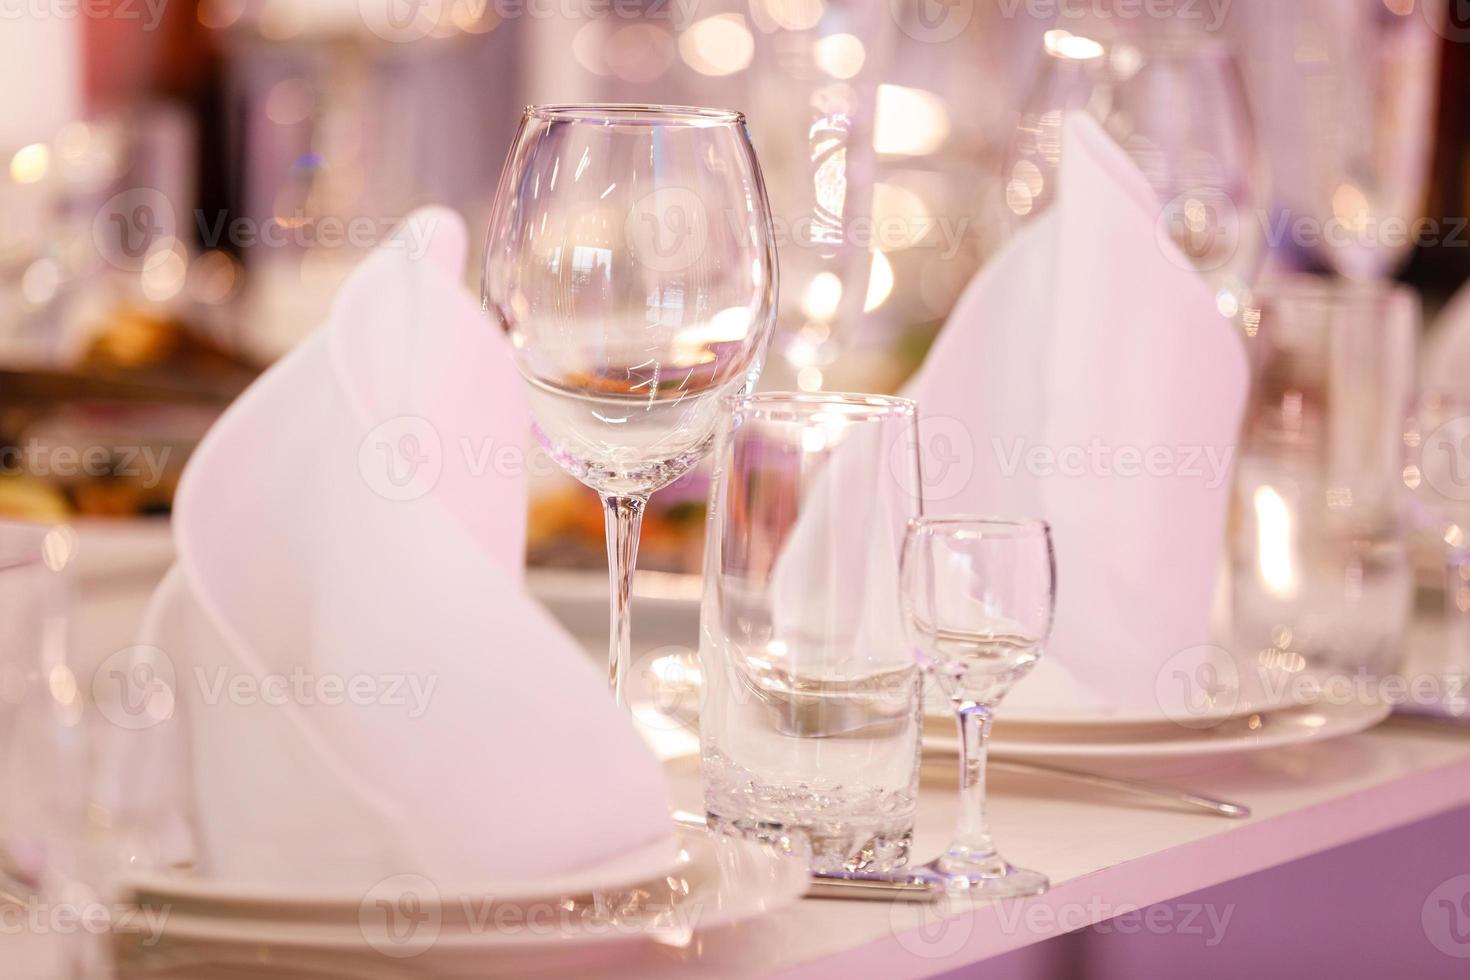 Empty glass set in restaurant. wedding, decor, celebration, holiday concept - romantic table setting with white tablecloth, plates, crystal glasses photo